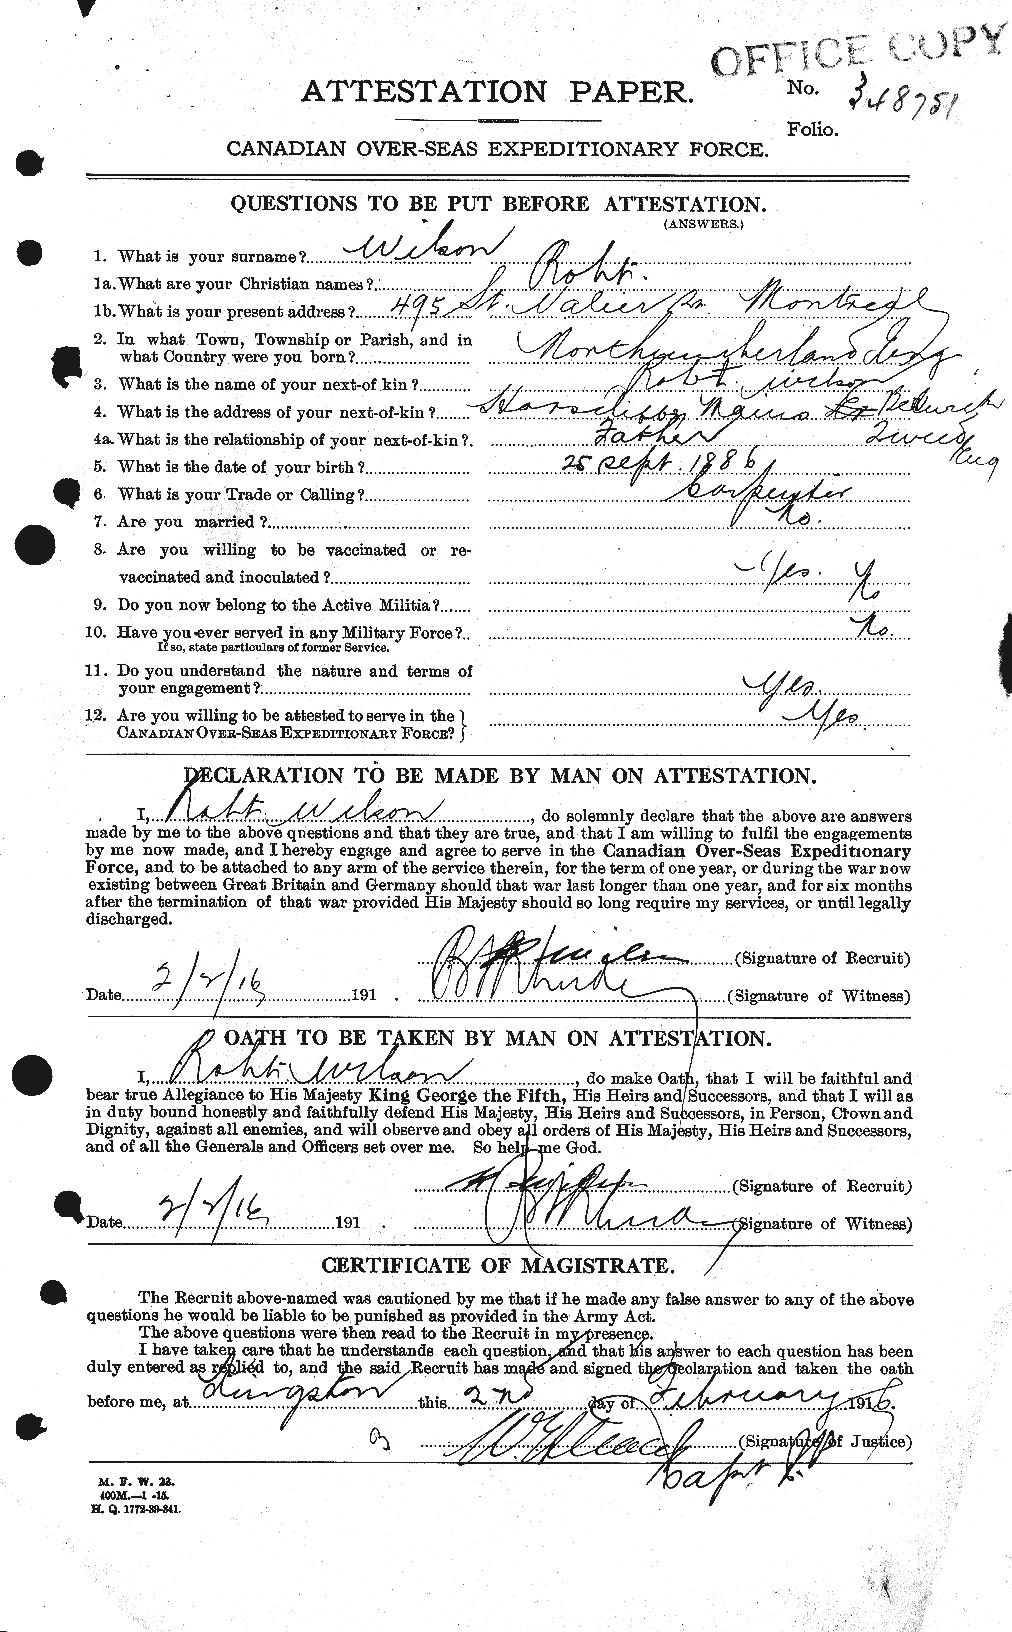 Personnel Records of the First World War - CEF 680932a